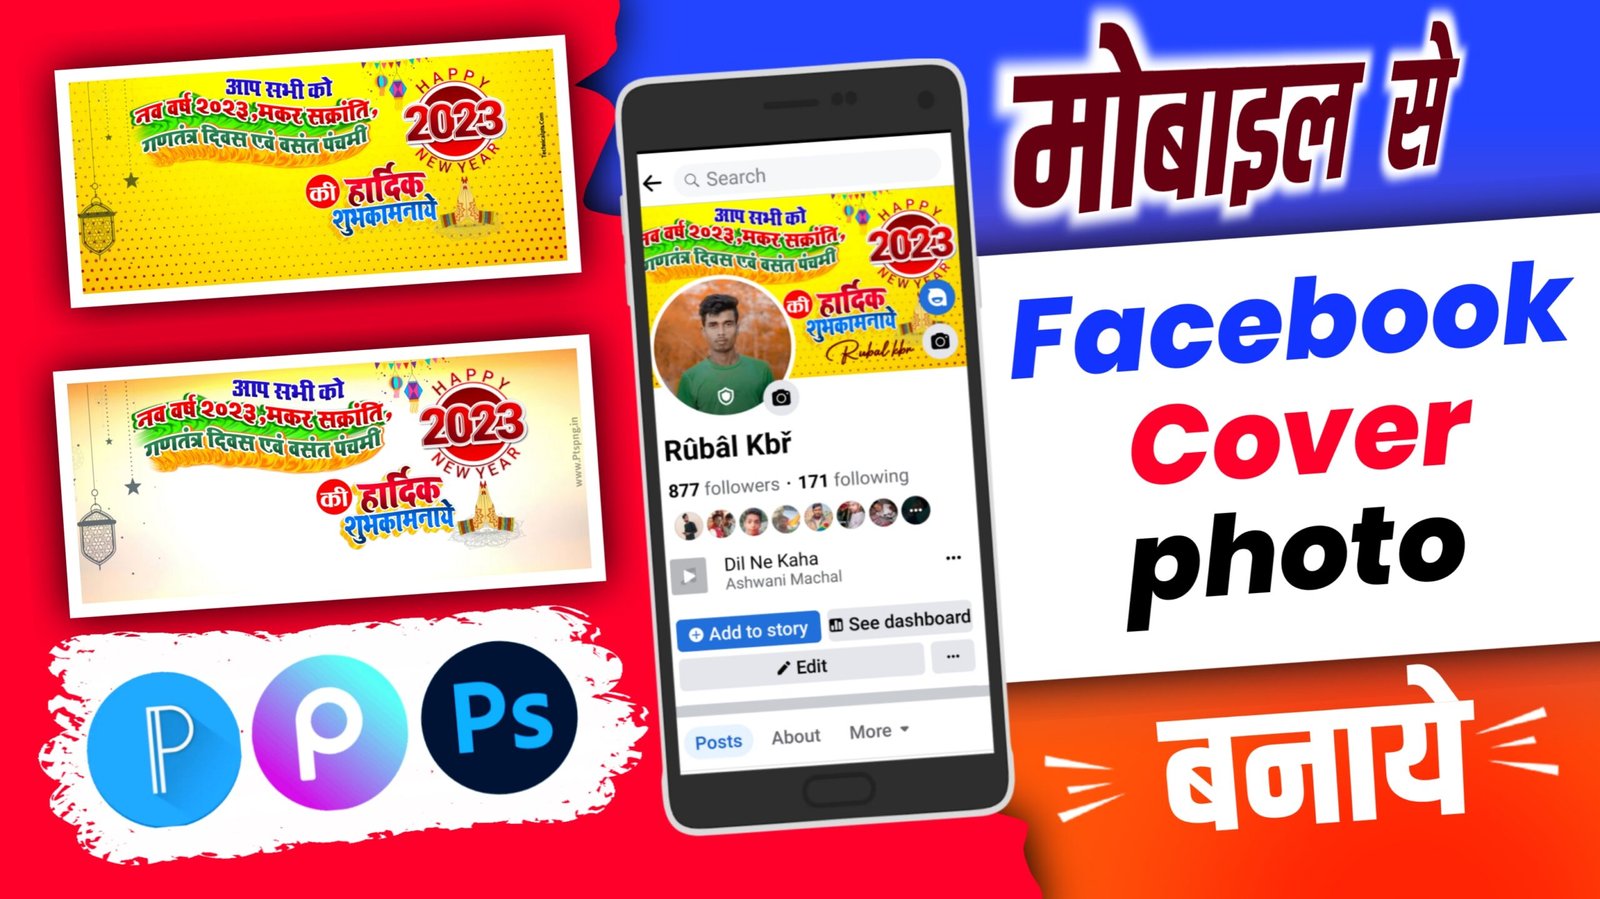 How to make festival Facebook cover photo art<br>Happy New year Facebook cover art<br>editing naya sal Facebook cover photo kaise banaen<br>Happy New year Facebook editing 2023